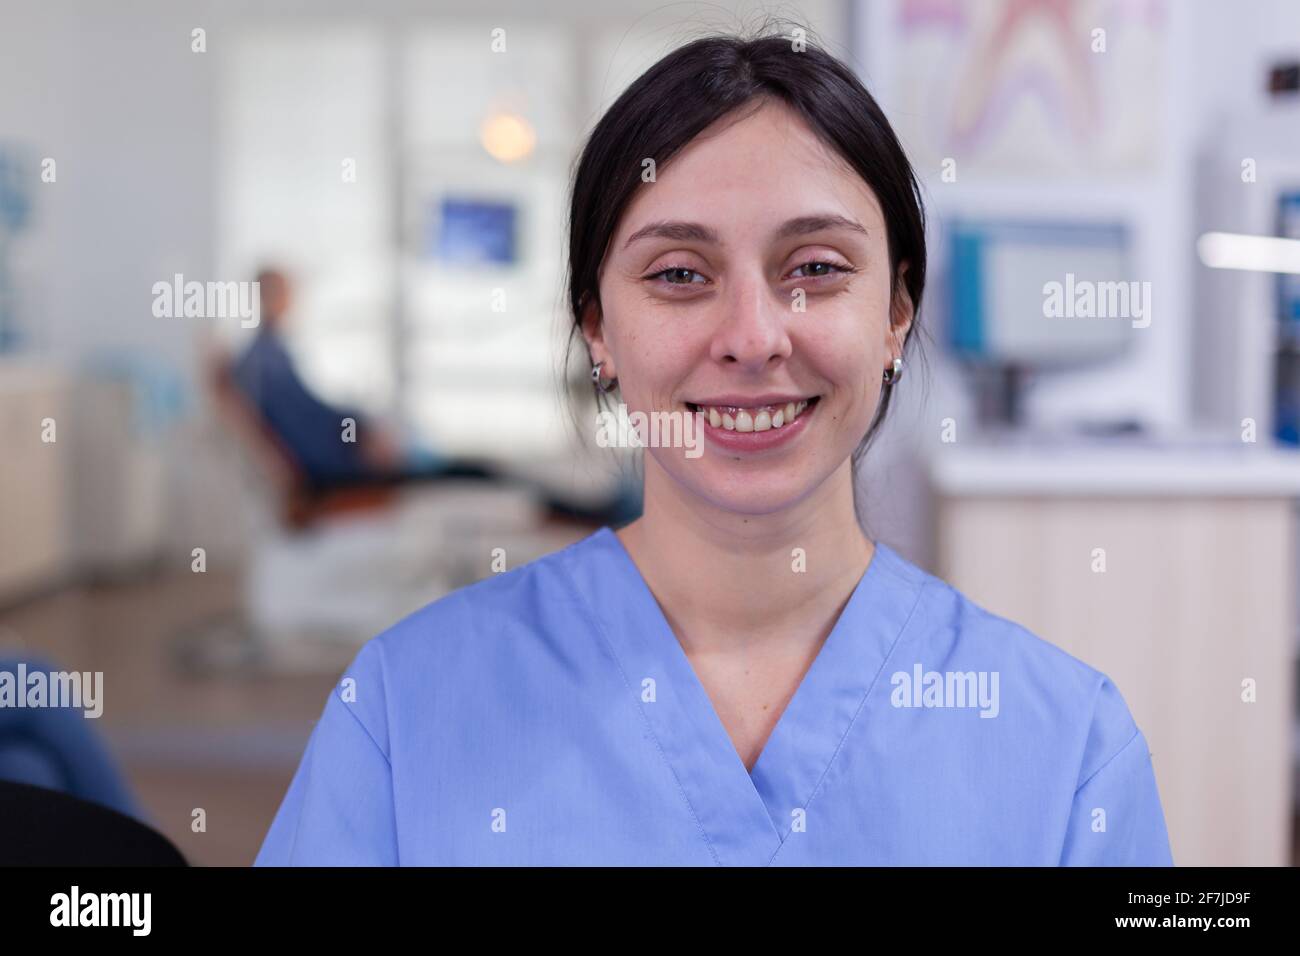 Smiling stomatology nurse looking at camera in dentist office wainting area, senior man waiting for teeth health examination. Dentistiry woman sitting on chair. Stock Photo